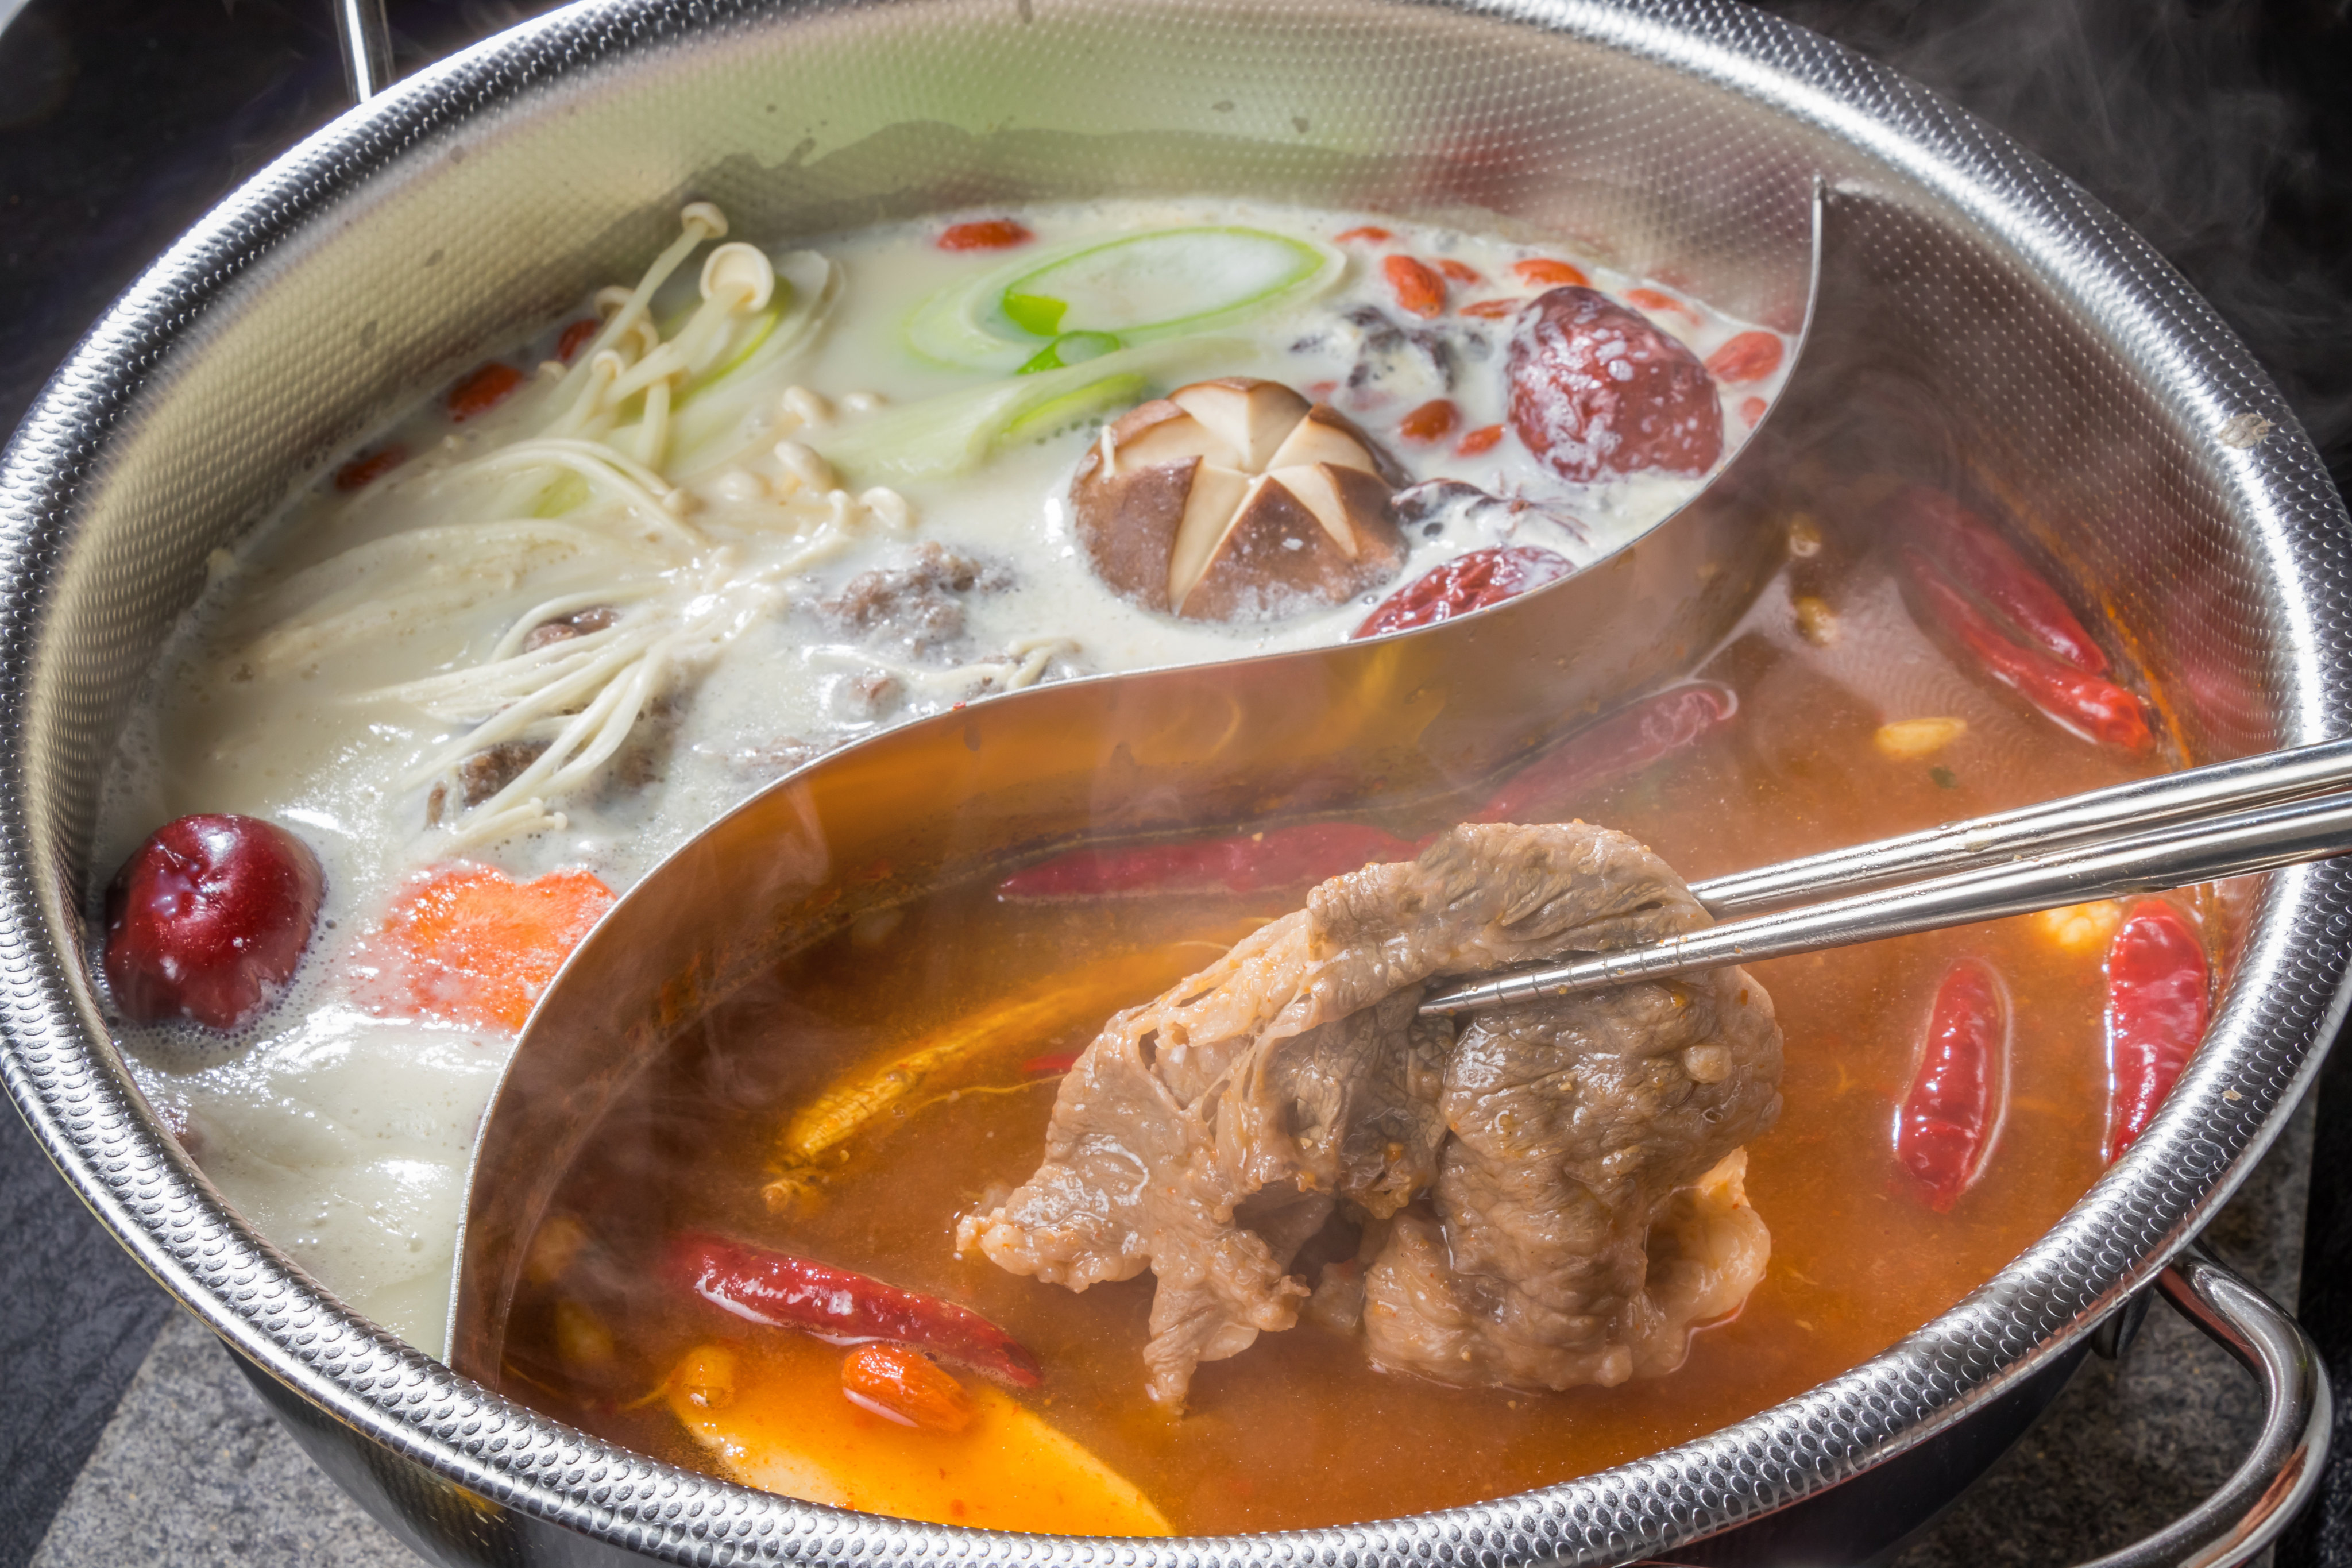 Chinese hot pot dish prepared with medicinal herbs. Photo: Shutterstock